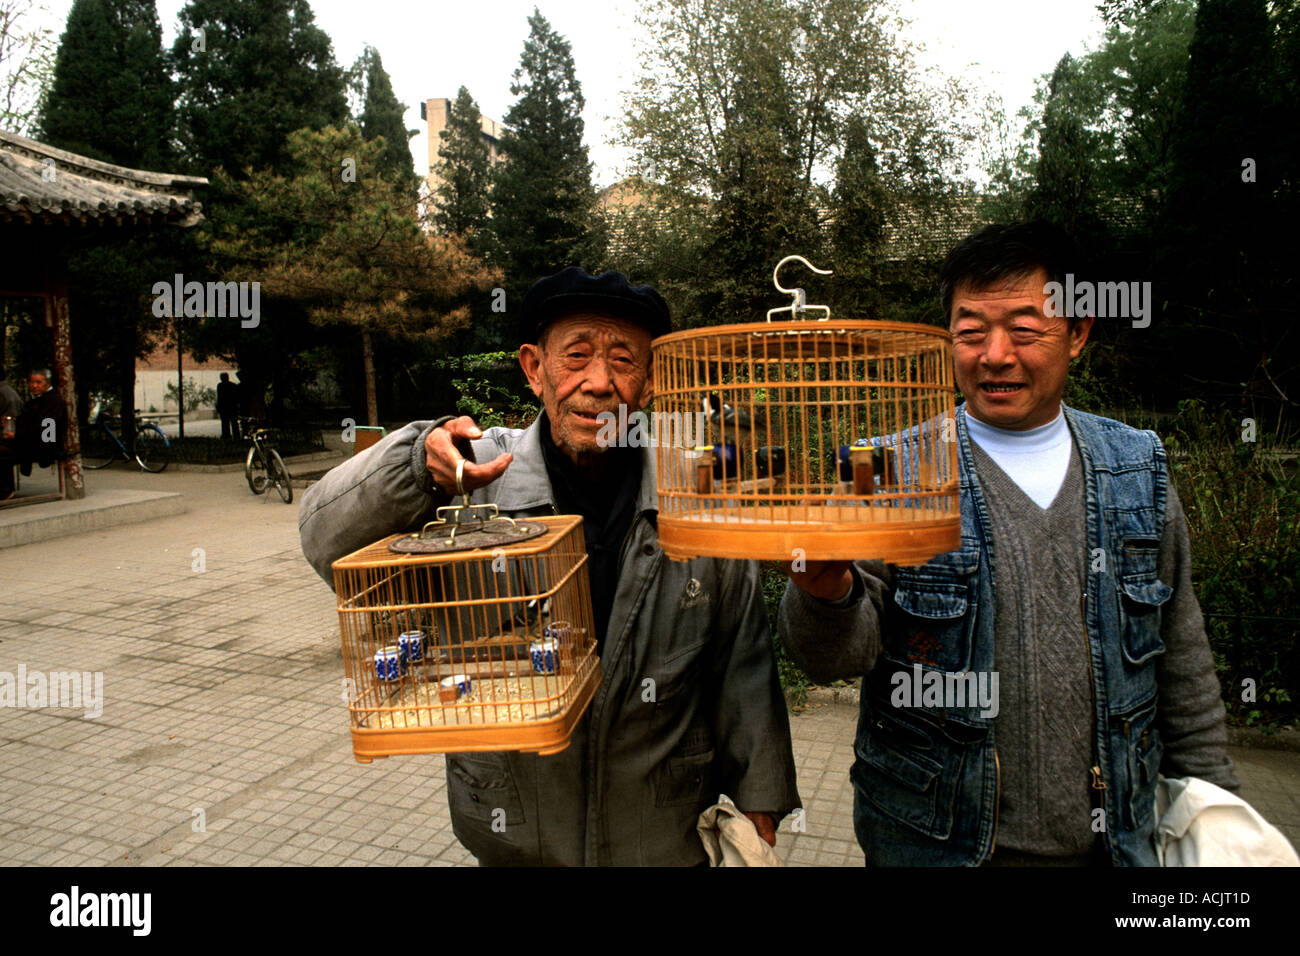 local-chinese-men-with-birds-in-the-park-beijing-china-ACJT1D.jpg